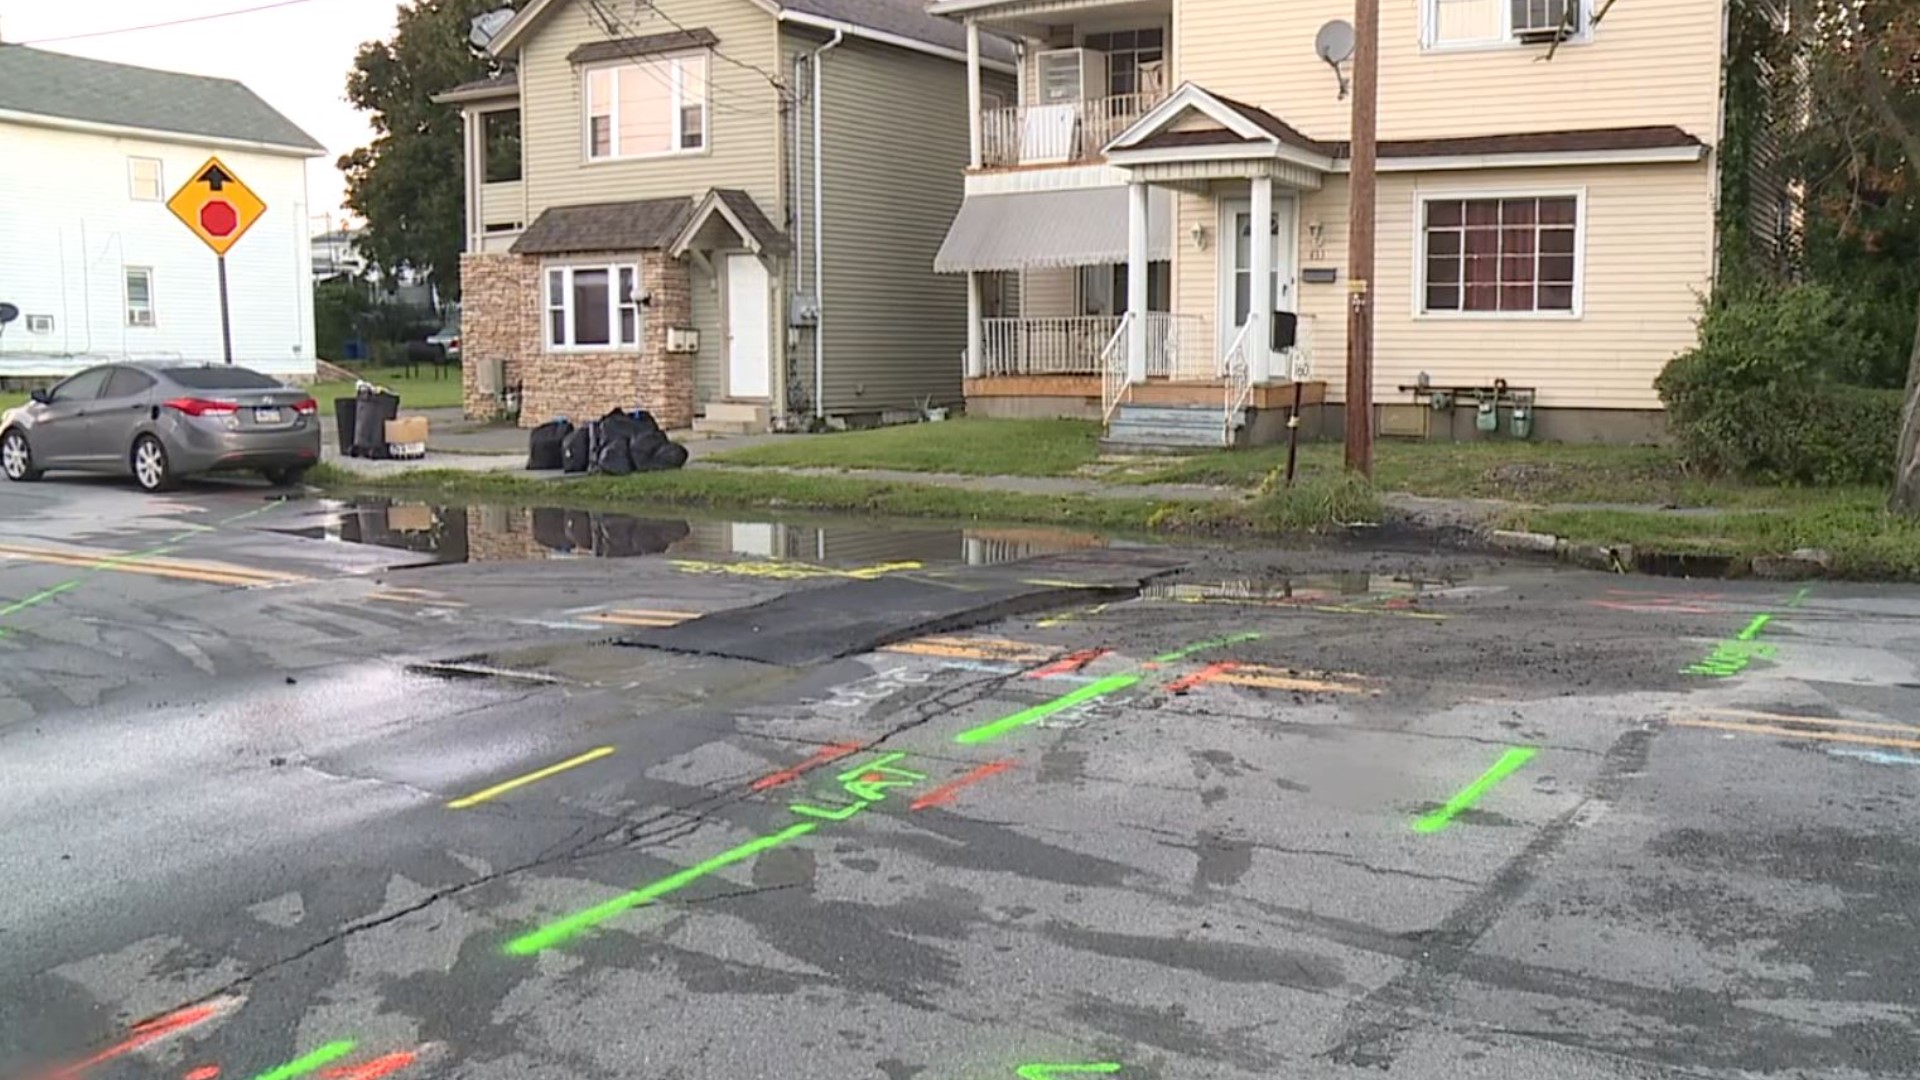 Part of a road is shut down in Scranton because of a broken water main.